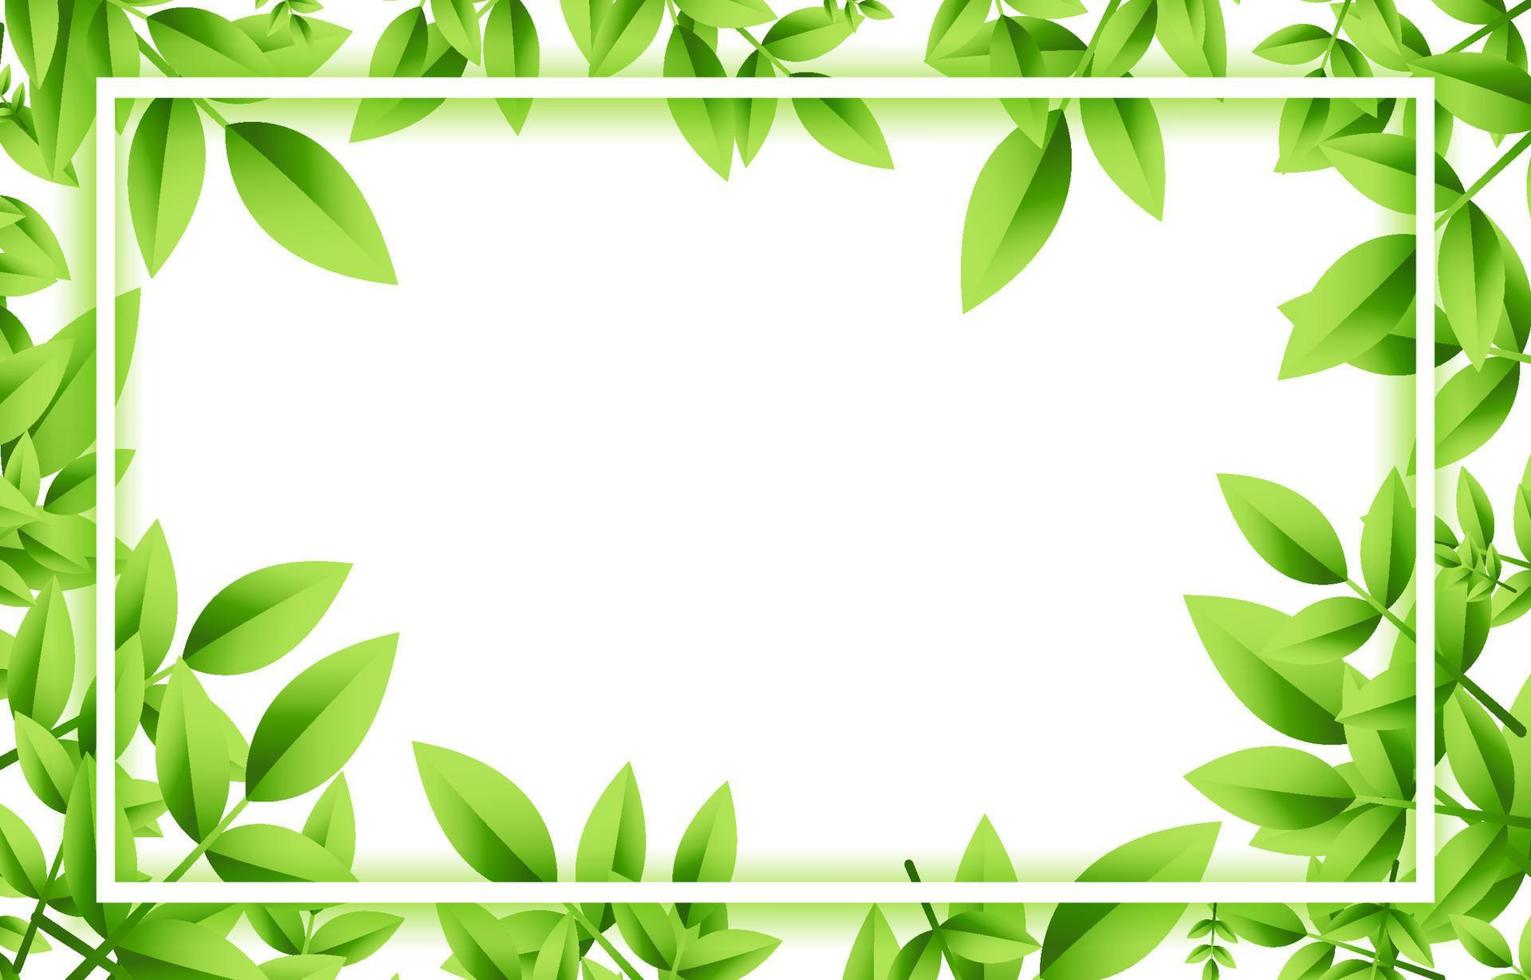 Green Leaves Photos Download Free Green Leaves Stock Photos  HD Images